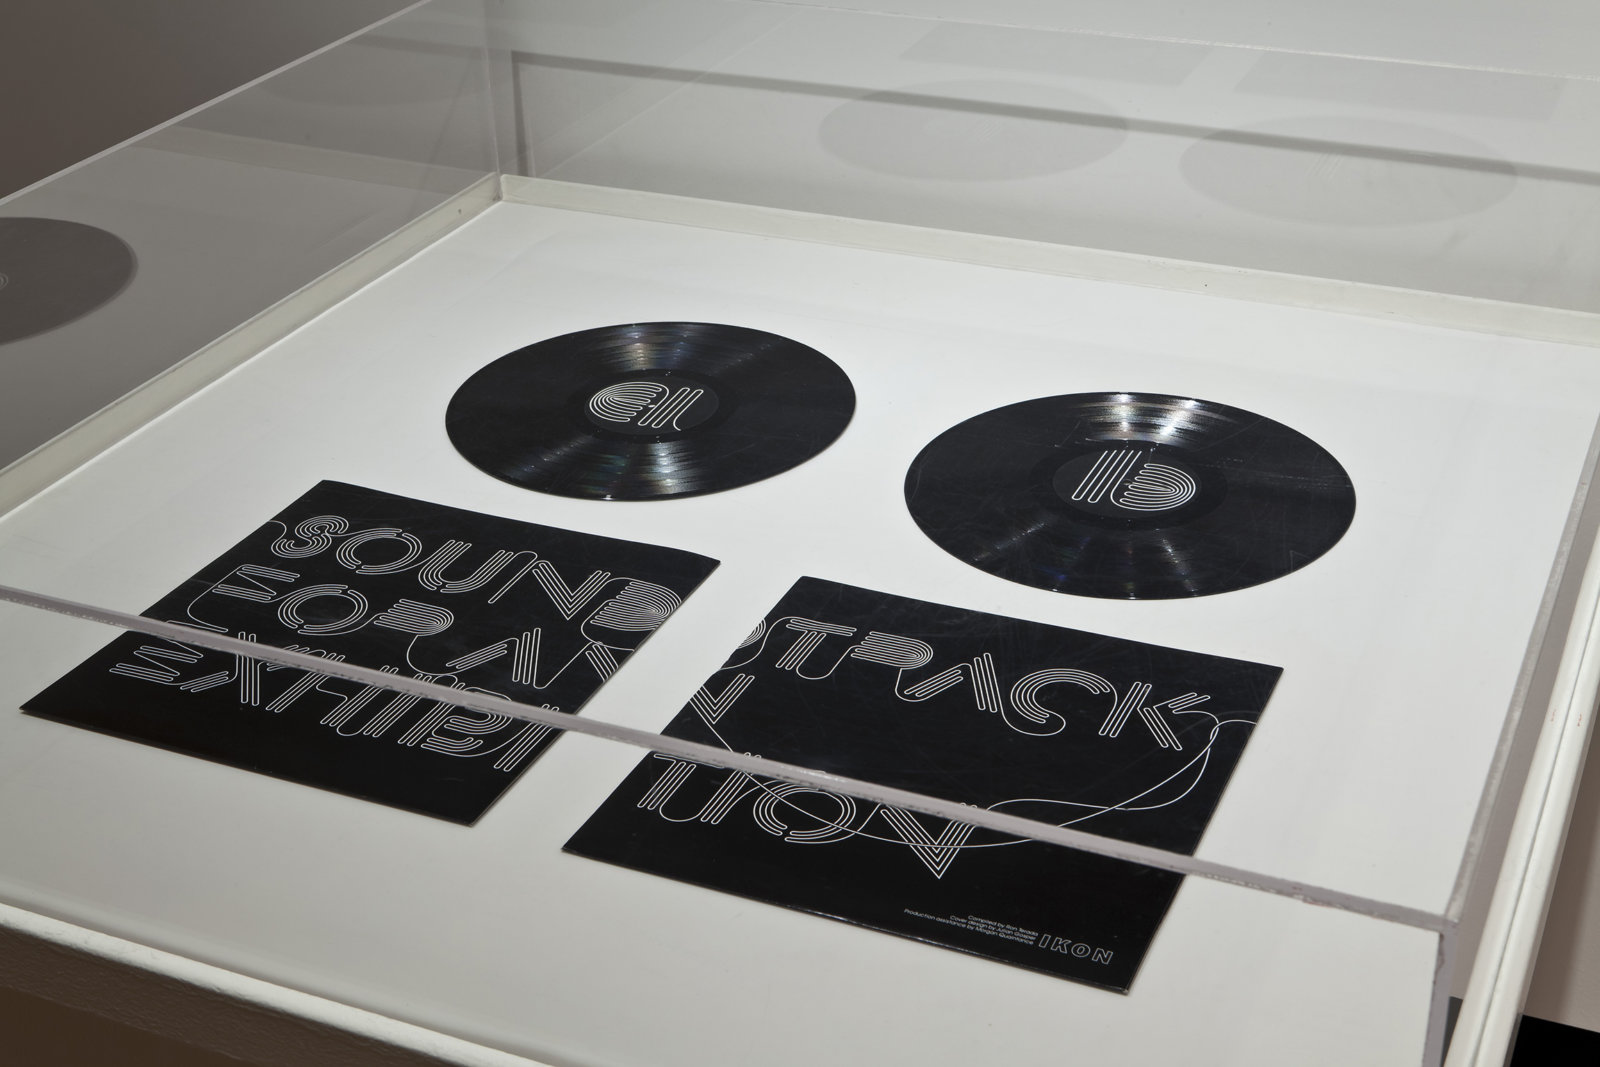 Ron Terada, Soundtrack for an Exhibition, 2010, vinyl record, 12 x 10 in. (30 x 25 cm). Installation view, Who I Think I Am, Justina M. Barnicke Gallery, 2011